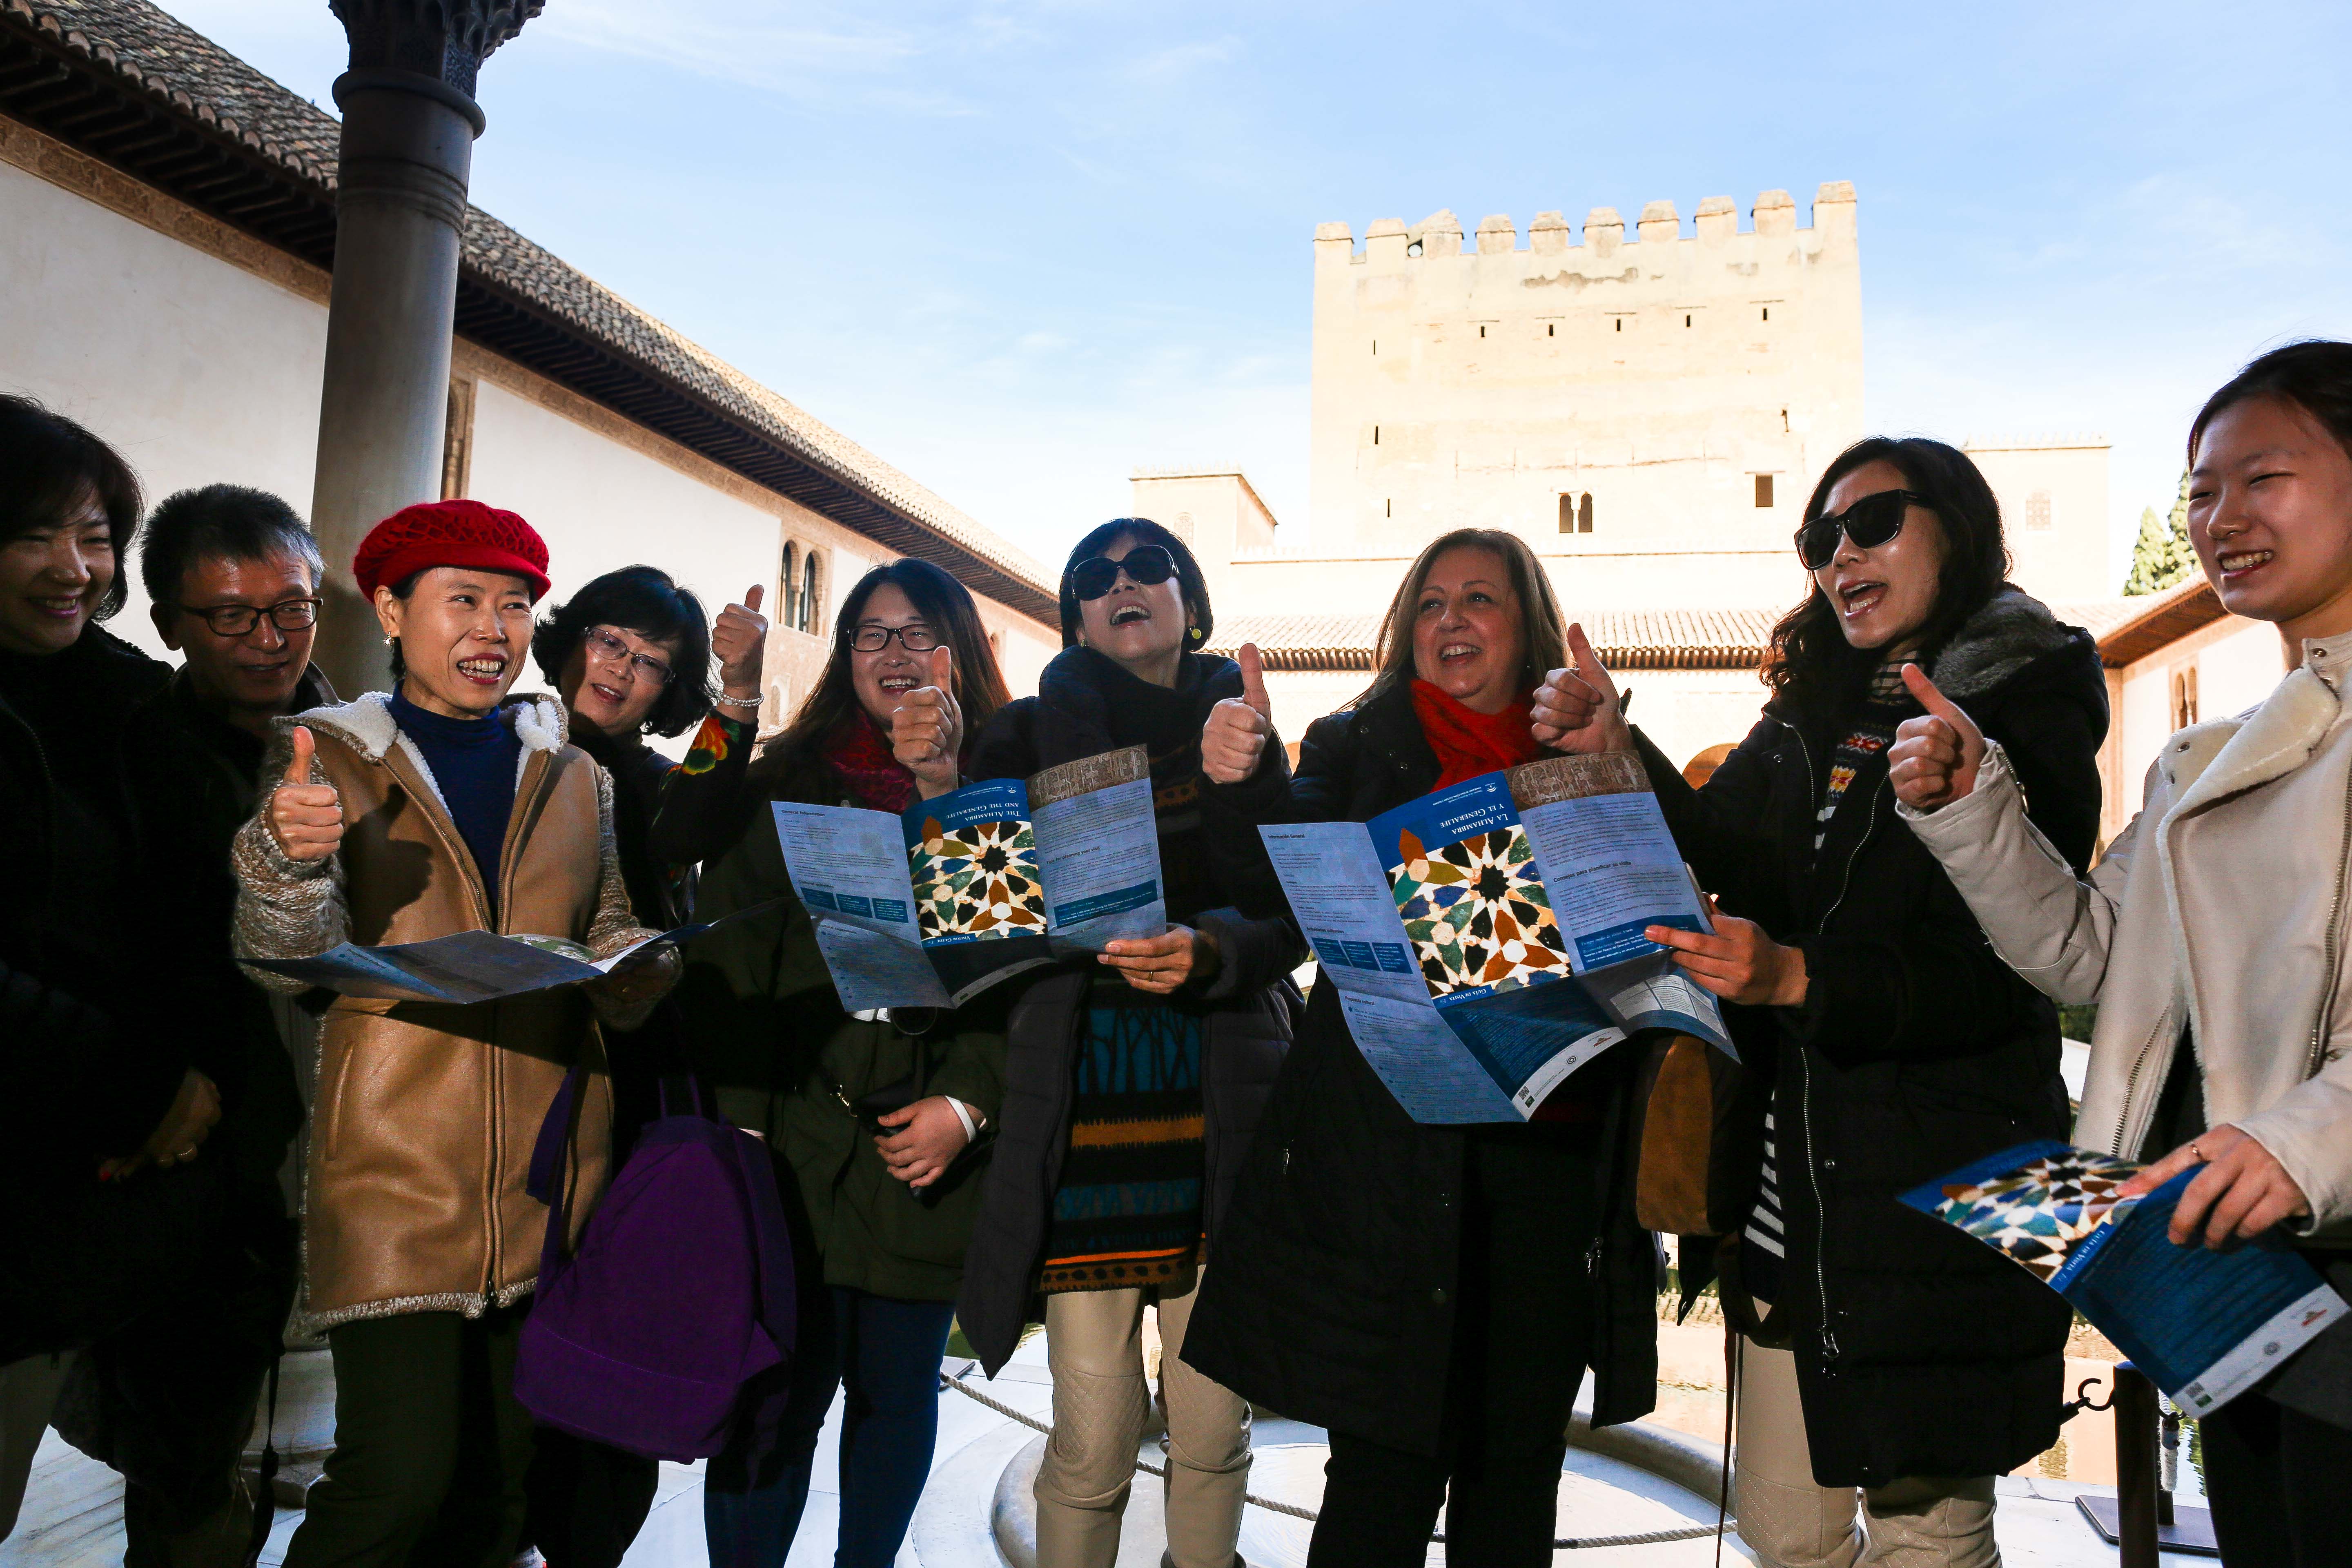 The Alhambra receives a record number of visitors in 2014 making it the best year for tourim in its history